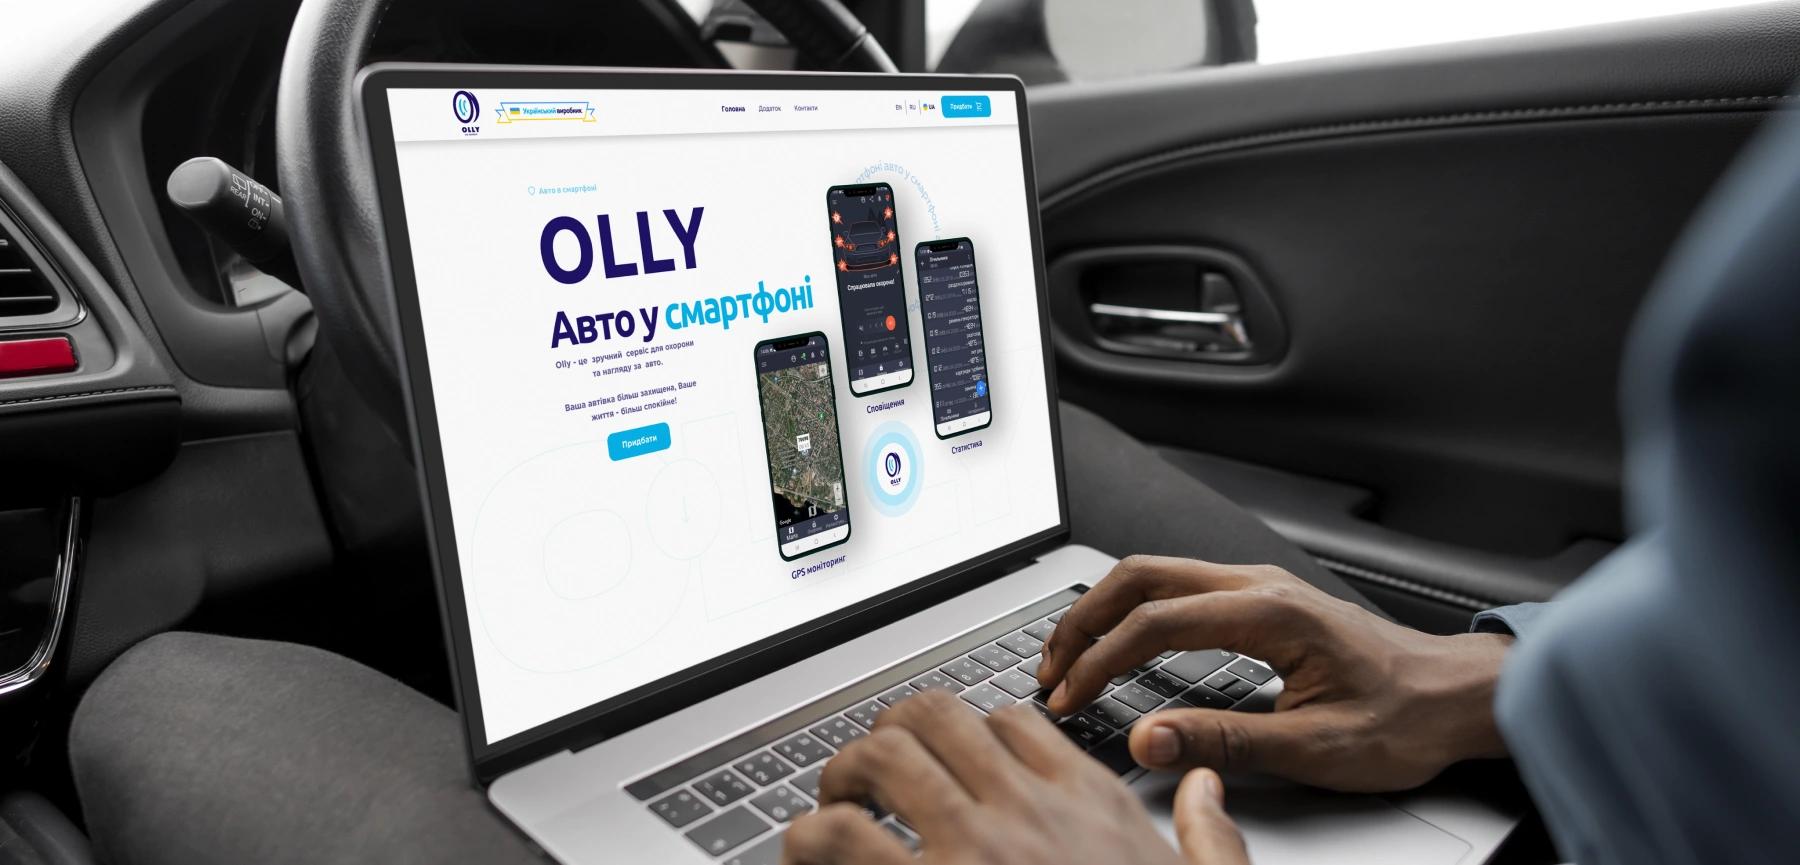 olly project mockup